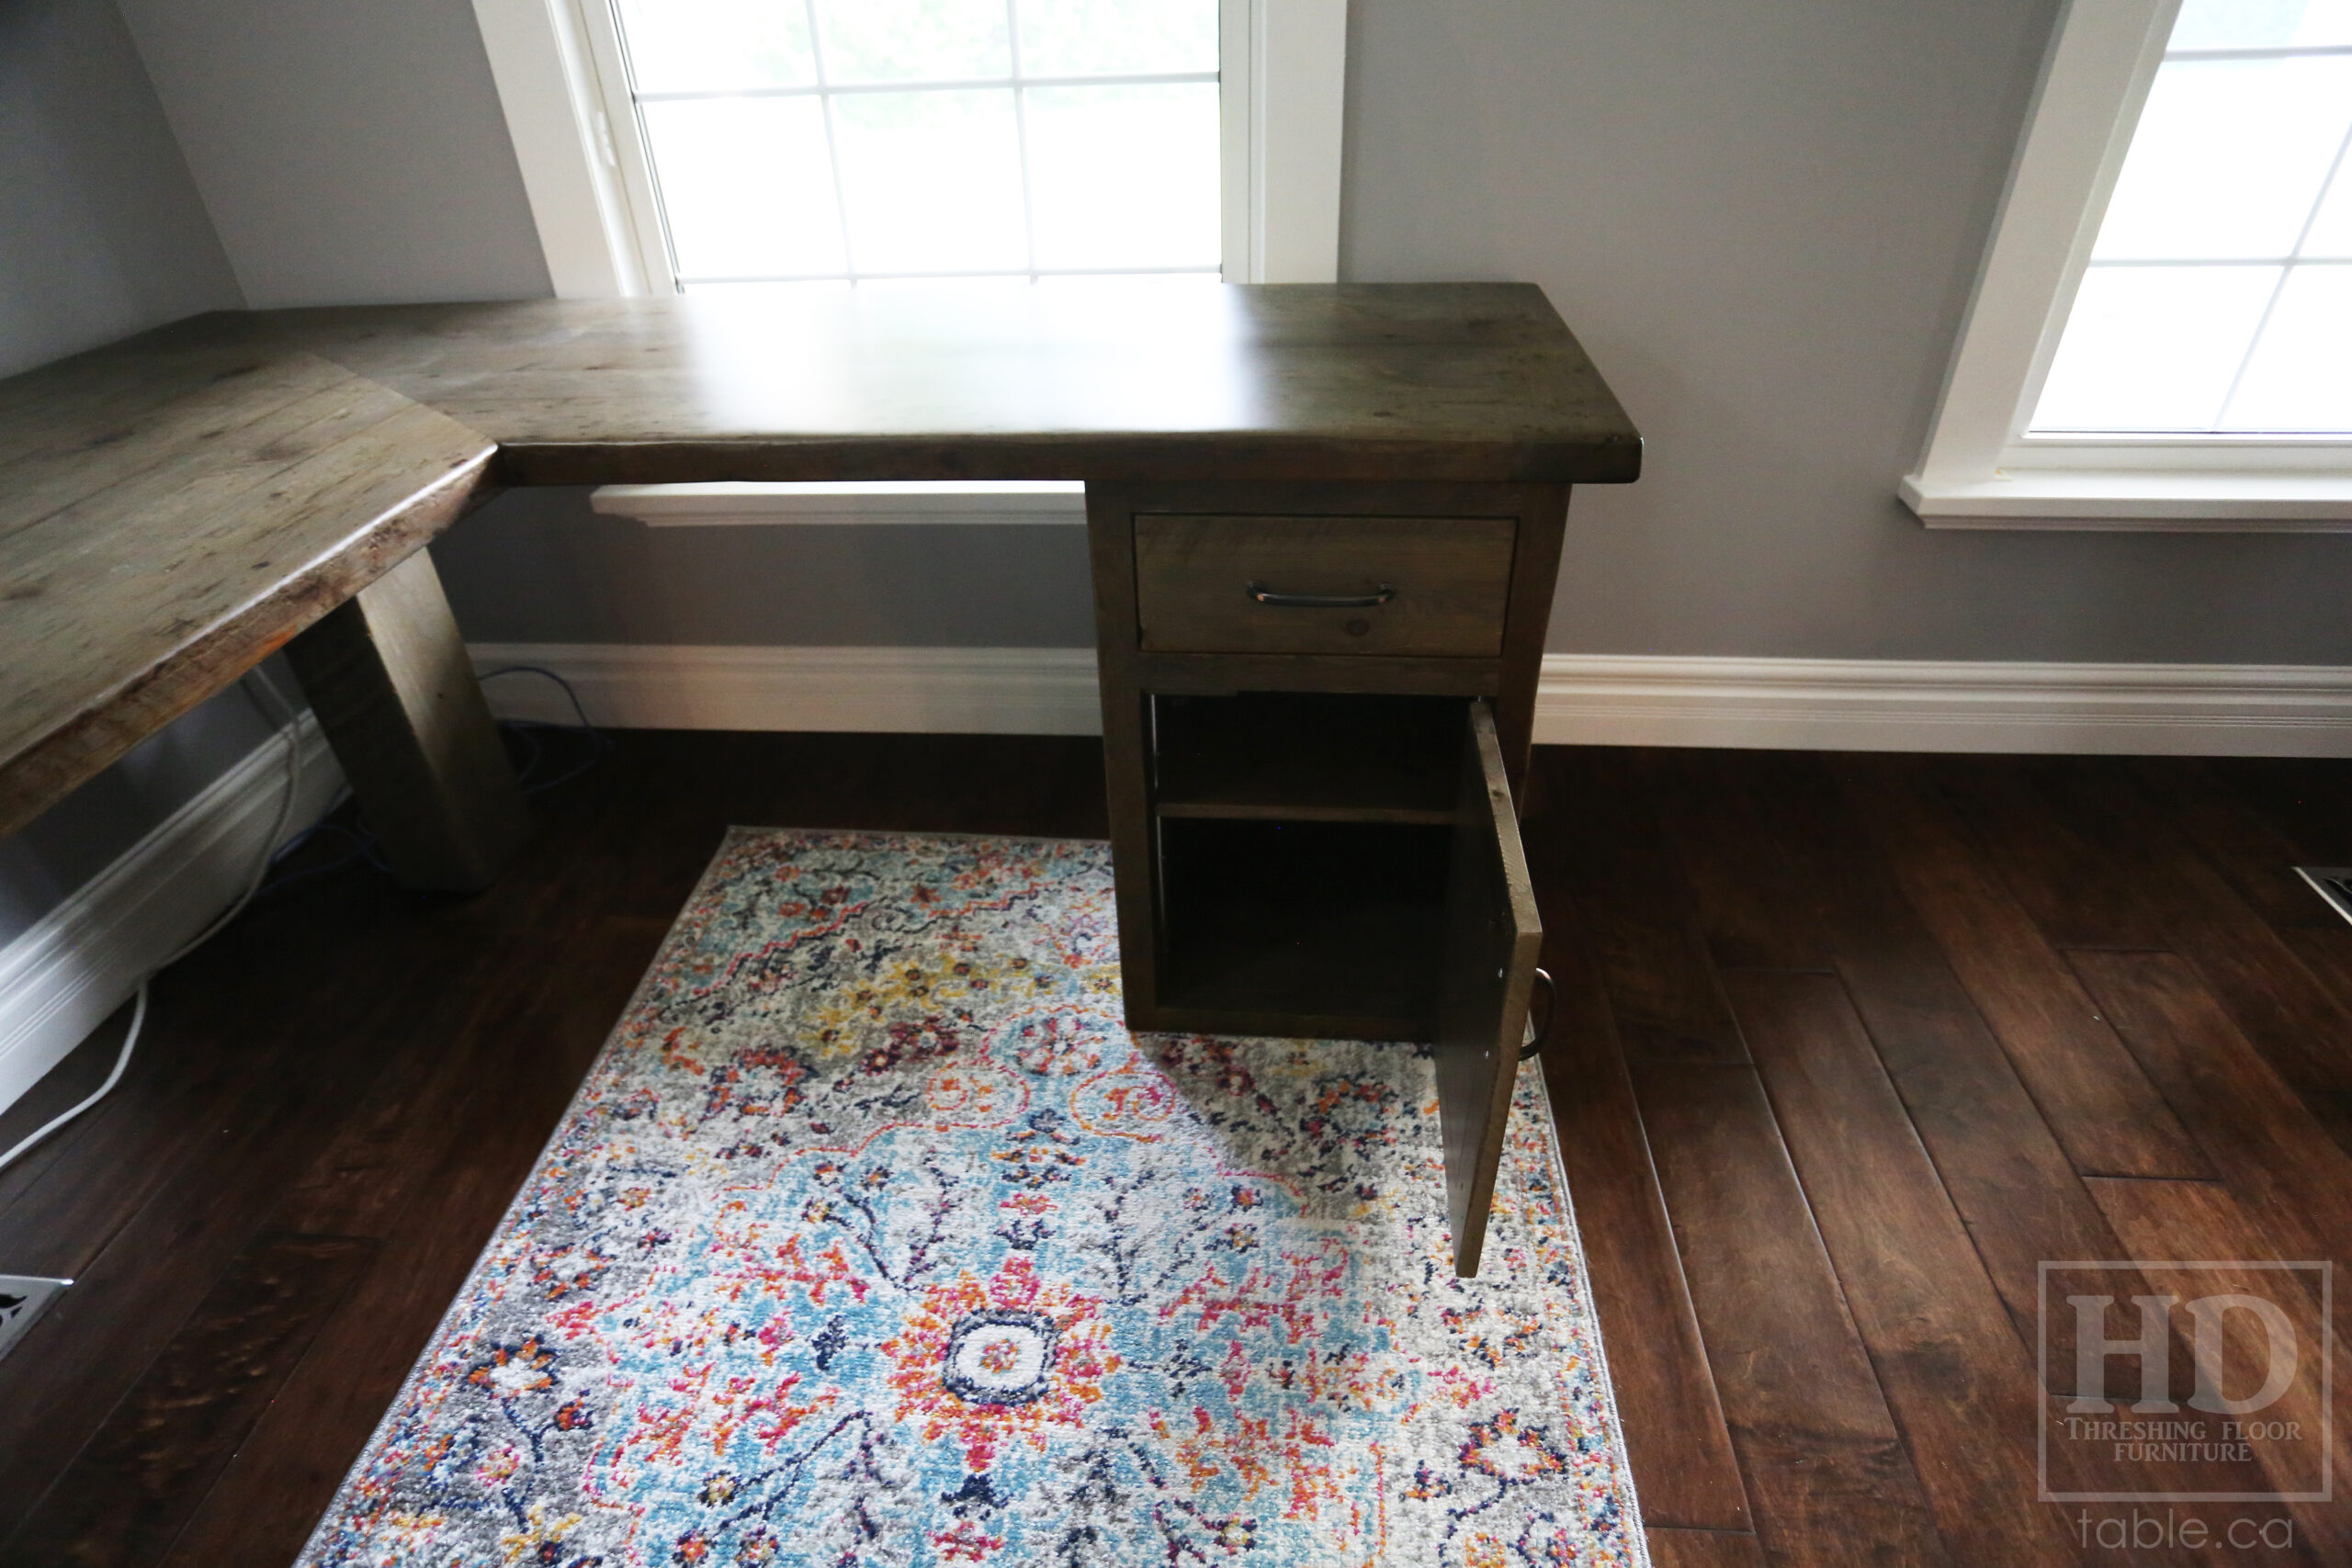 78" Ontario Barnwood Desk we made for a Woodstock home - 32" deep - 74" Return / 24" deep - 4 Drawers - 1 Door - 31" height - Left Side Drawers [18" wide] - Right Side Top Drawer / Bottom Door - Corner Post - Reclaimed Old Growth Hemlock Threshing Floor + Grainery Board Construction - Original edges + distressing maintained - Cast Brass Lee Valley Hardware - Barnboard Grey Option [speciality finish] - Premium epoxy + matte polyurethane finish - www.table.ca